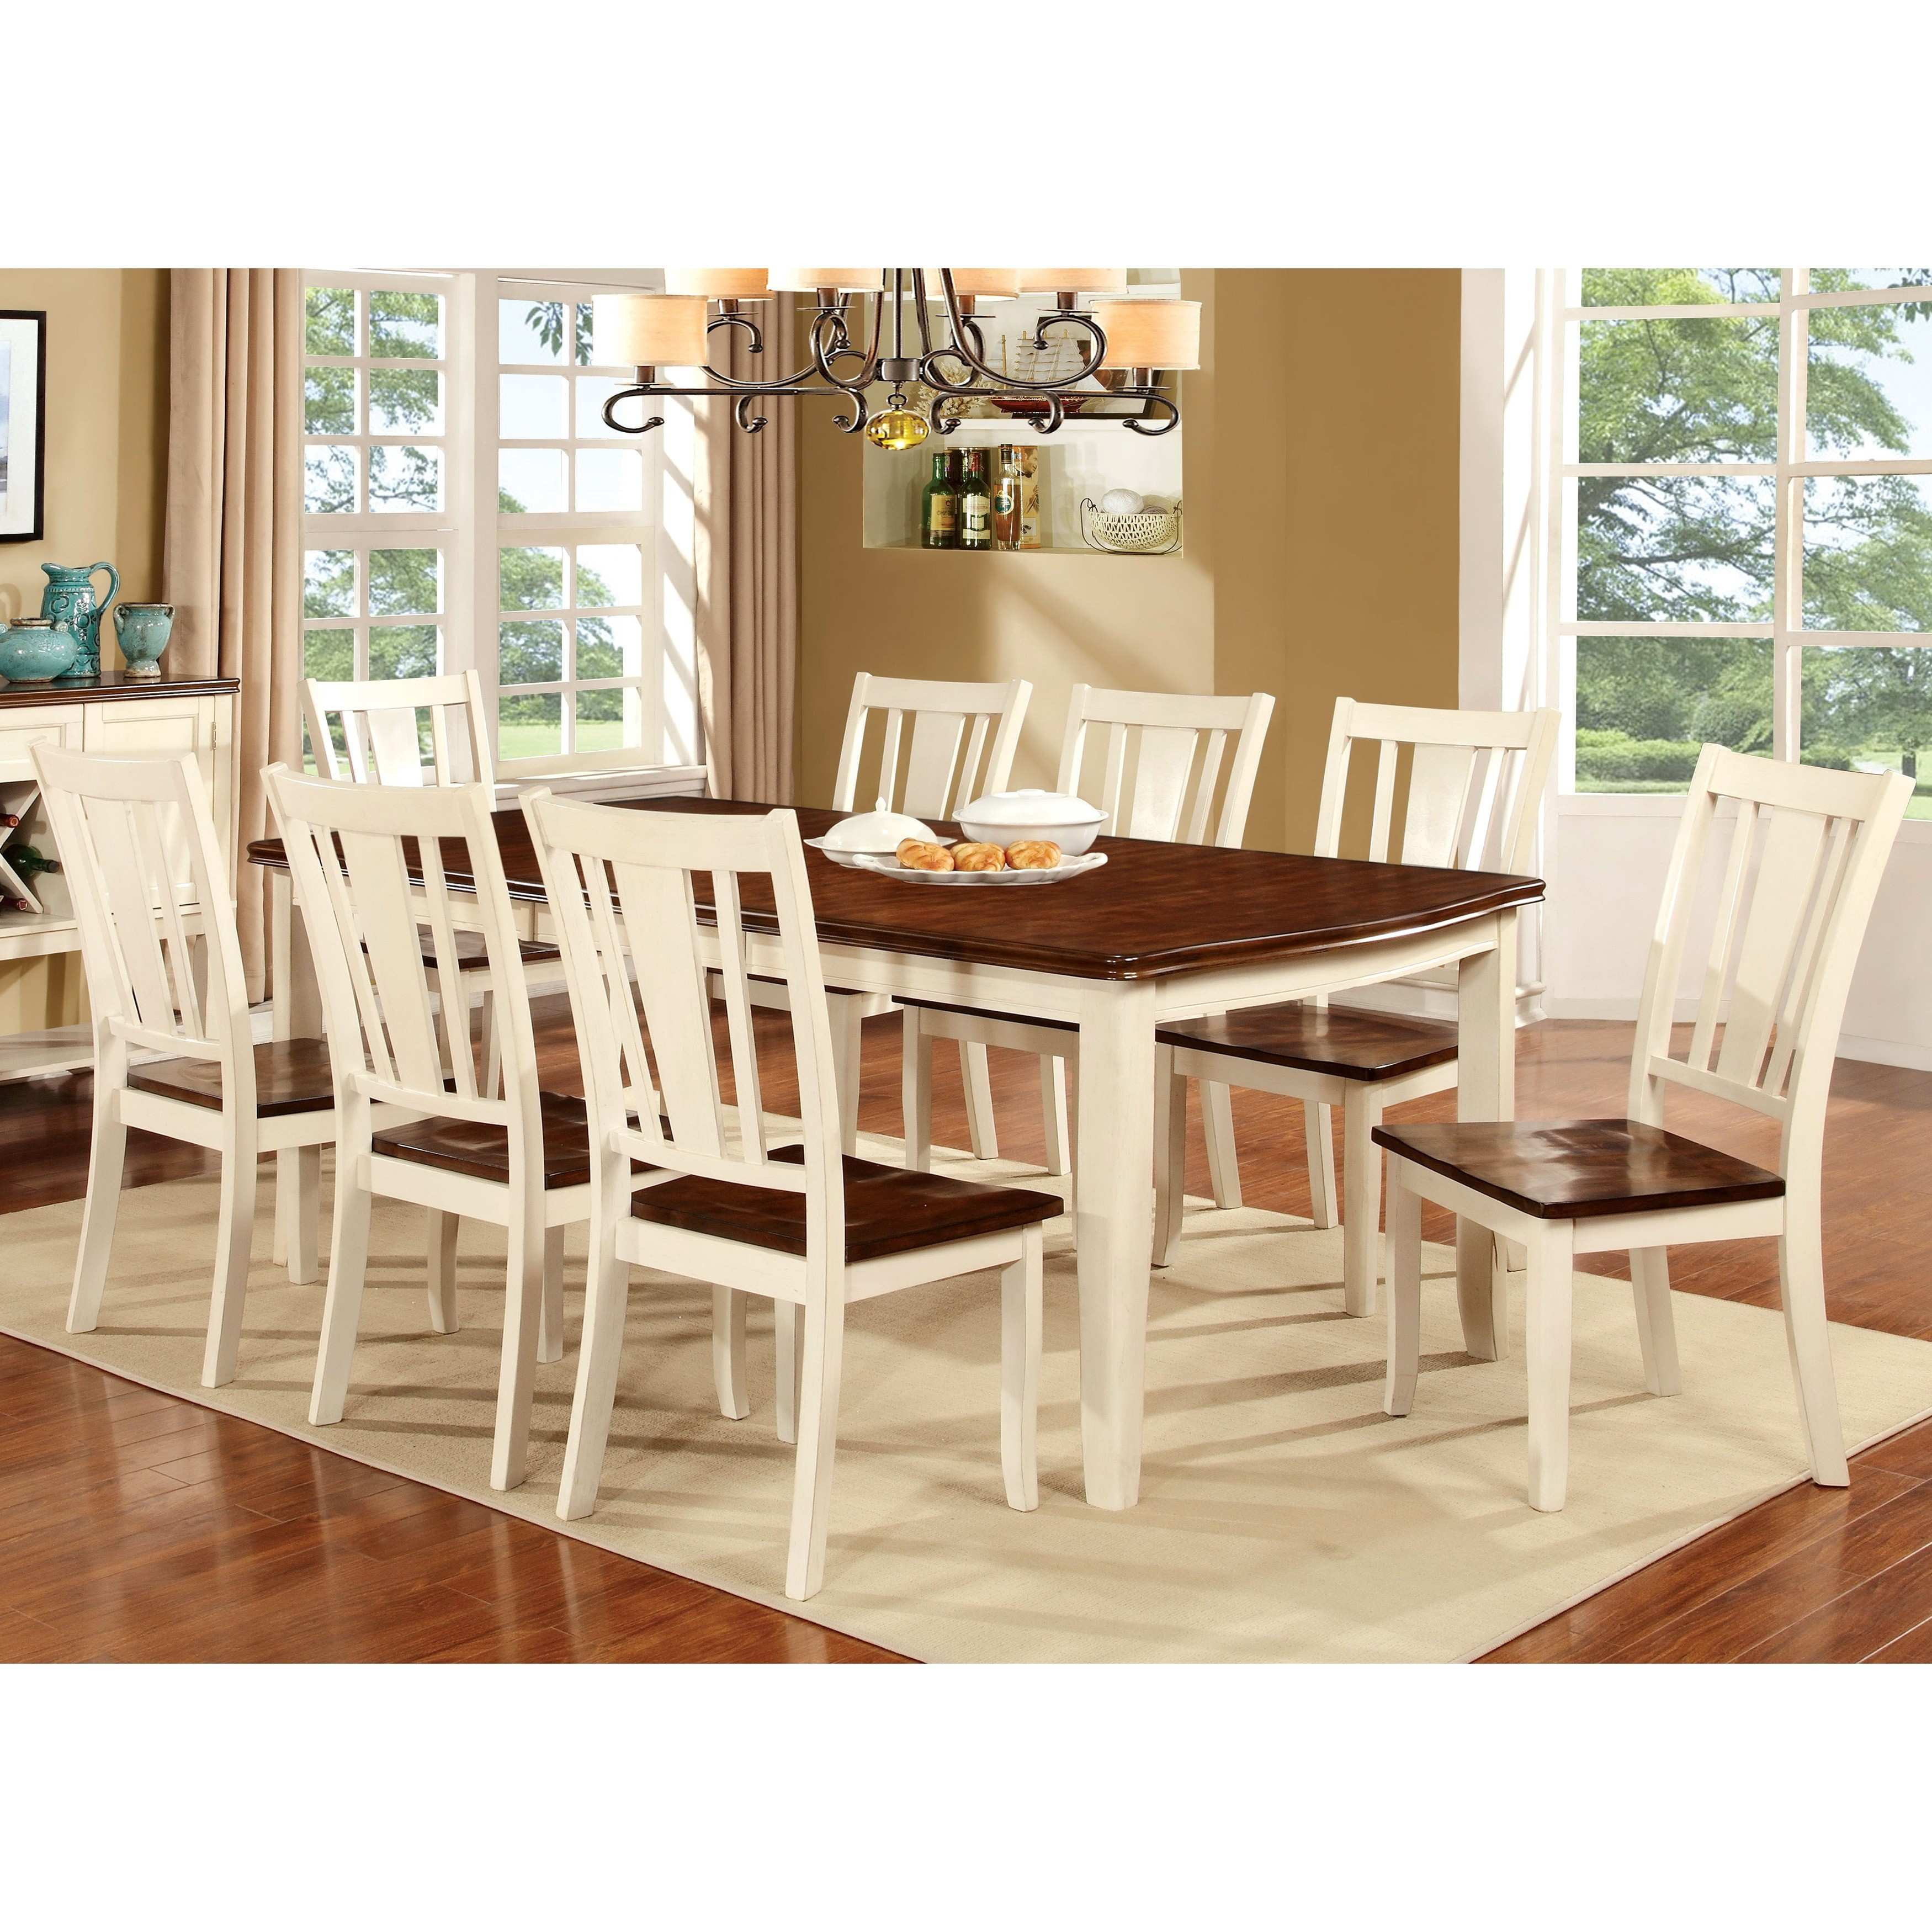 24 Ideal Hardwood Floor Protector Recliner 2024 free download hardwood floor protector recliner of alluring dining room chair pads and cushions of chair cushions regarding offers dining room chair pads and cushions with dining room chair covers luxury 